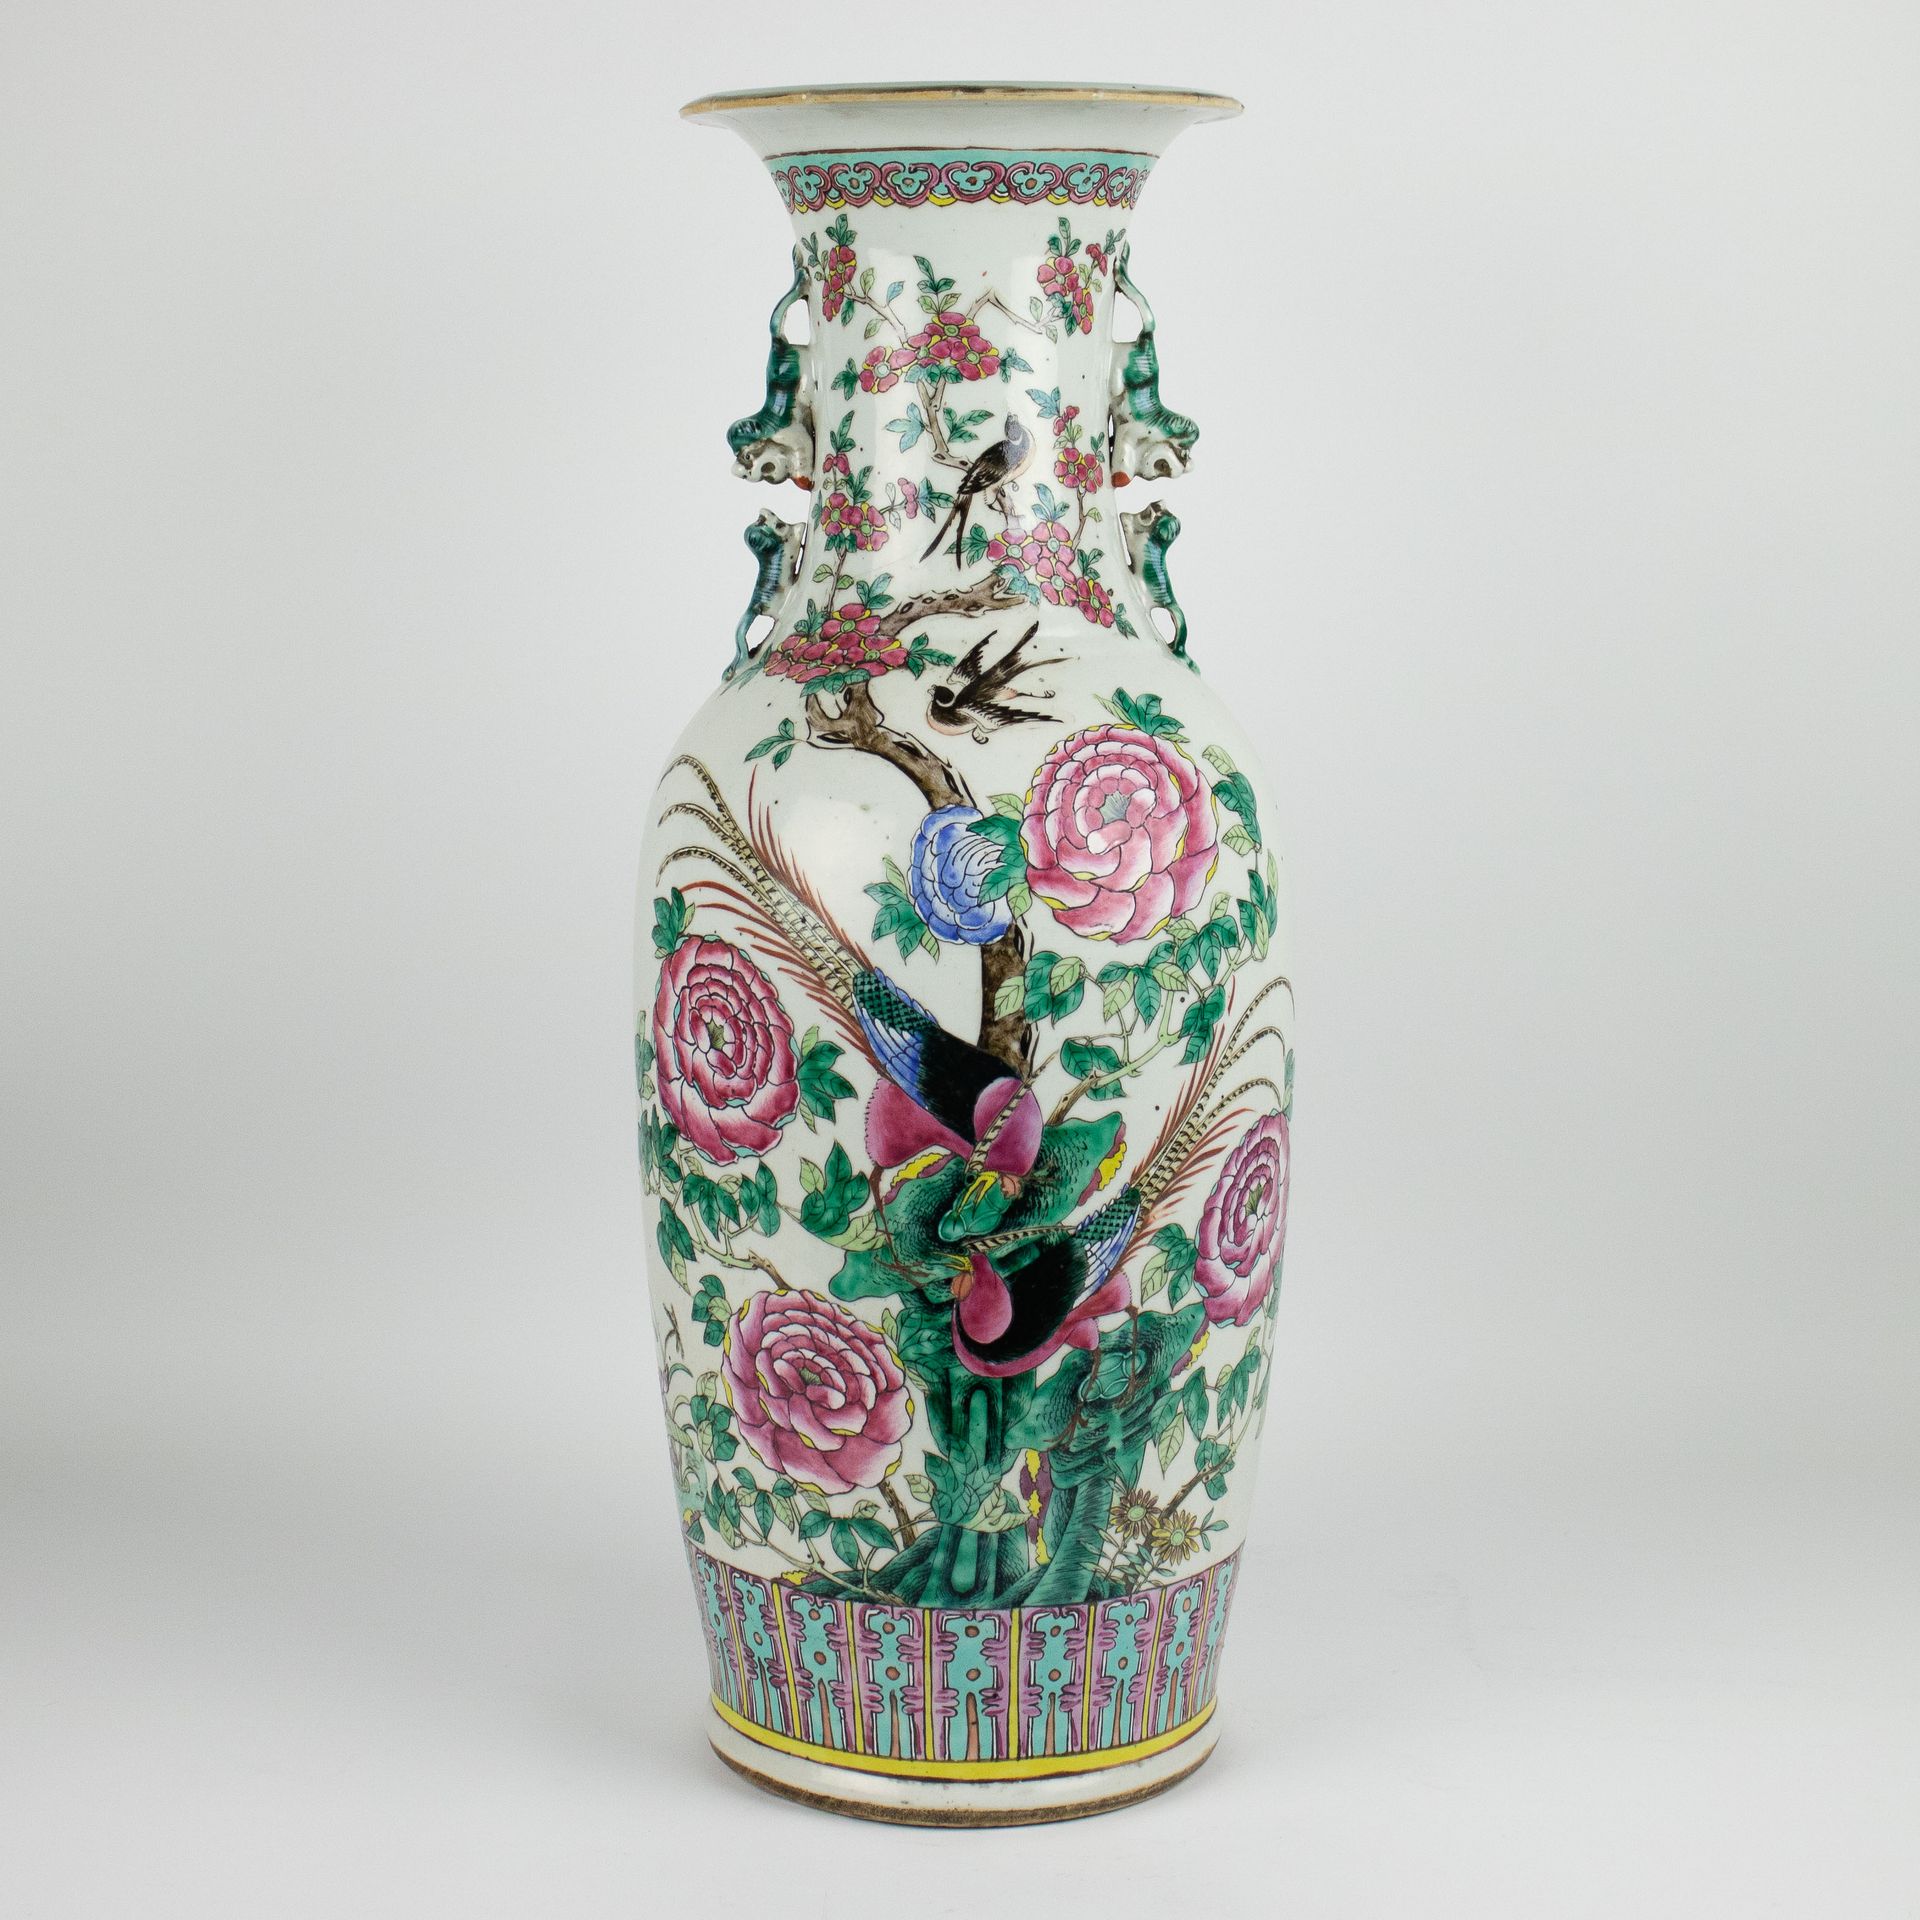 A Chinese vase 2nd half 19th century Decor 5 Pairs of Birds representing the 5 f&hellip;